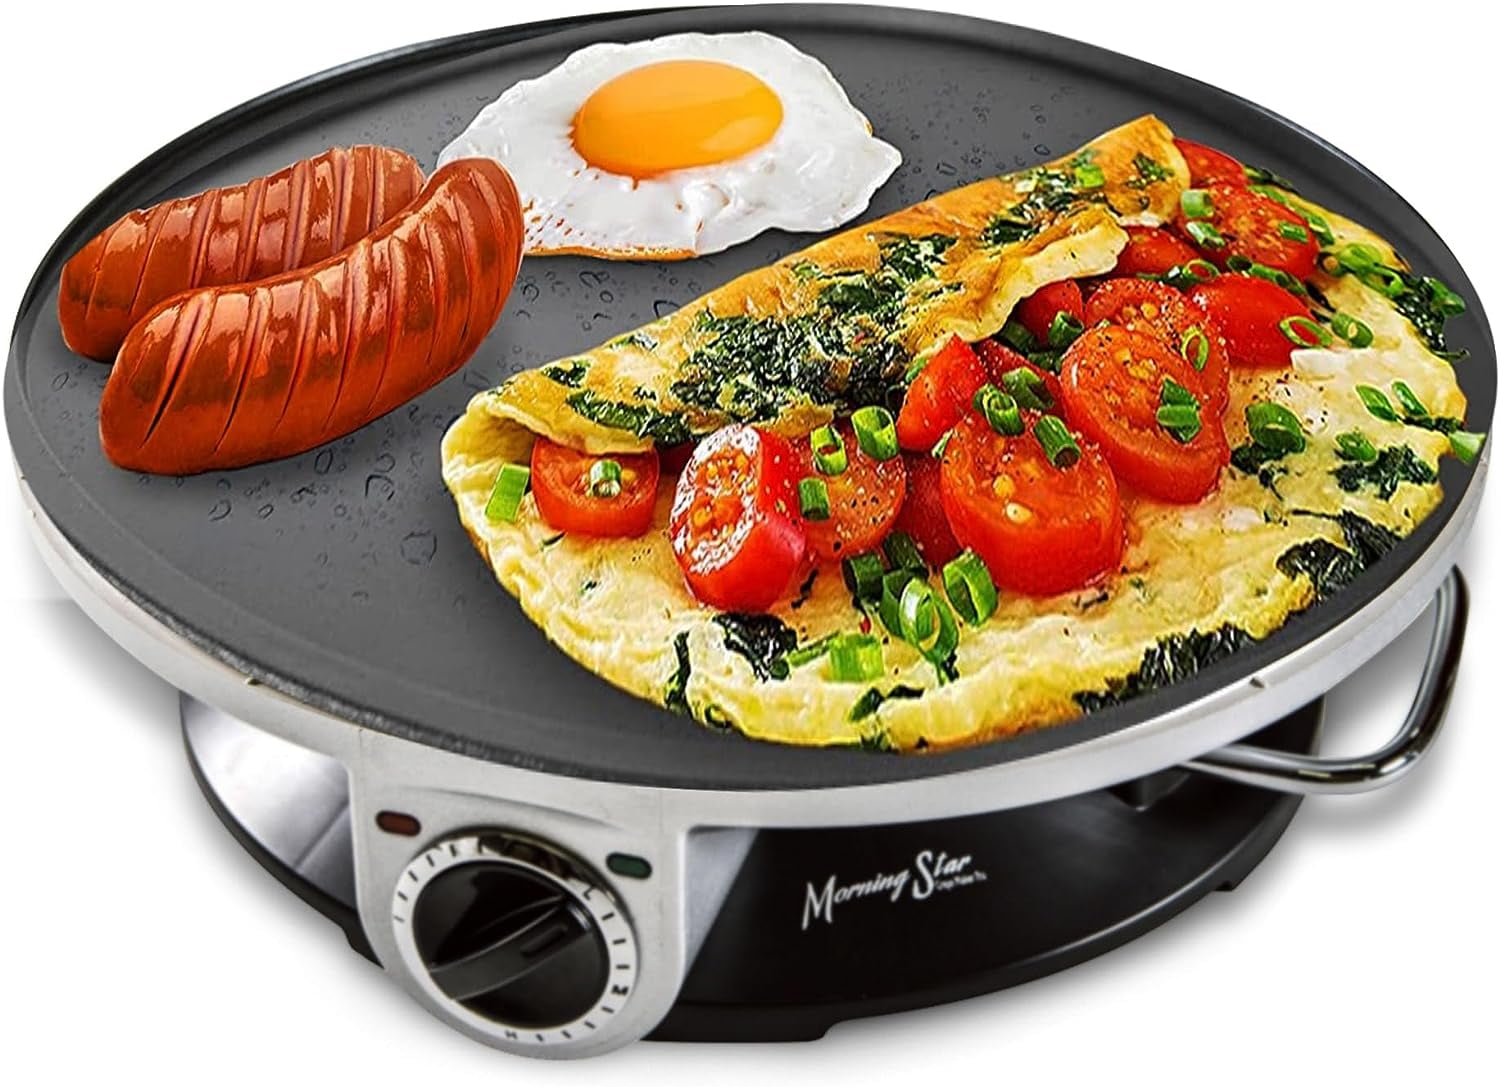 Morning Star Electric Crepe Maker with Large 13 Non-stick Griddle Ideal  for Pancakes, Tortillas, Omelets, Quesadillas, Bacon & Lefse, with Batter